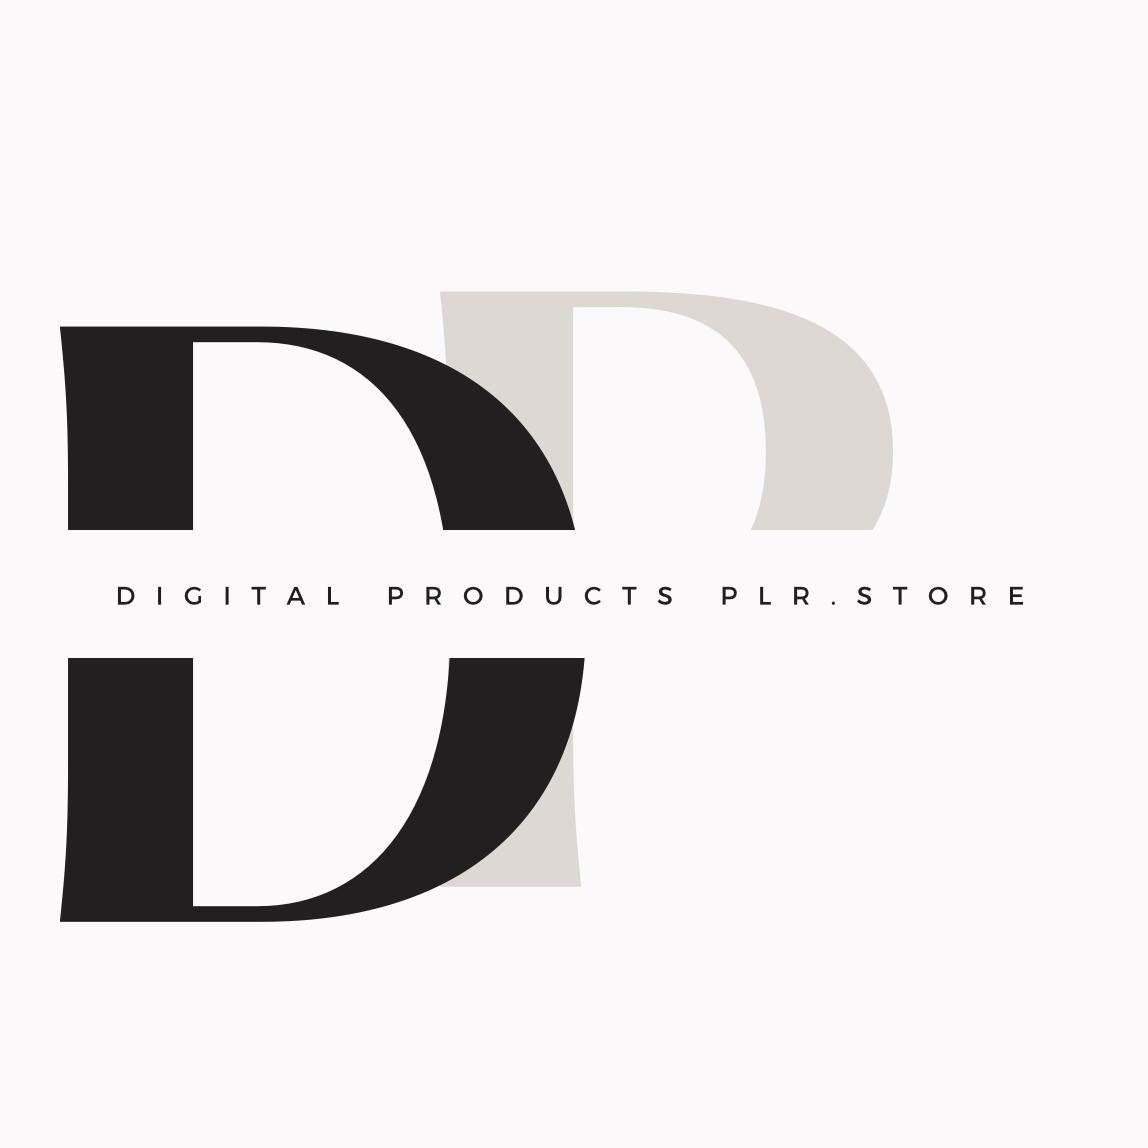 Digitalproducts's images